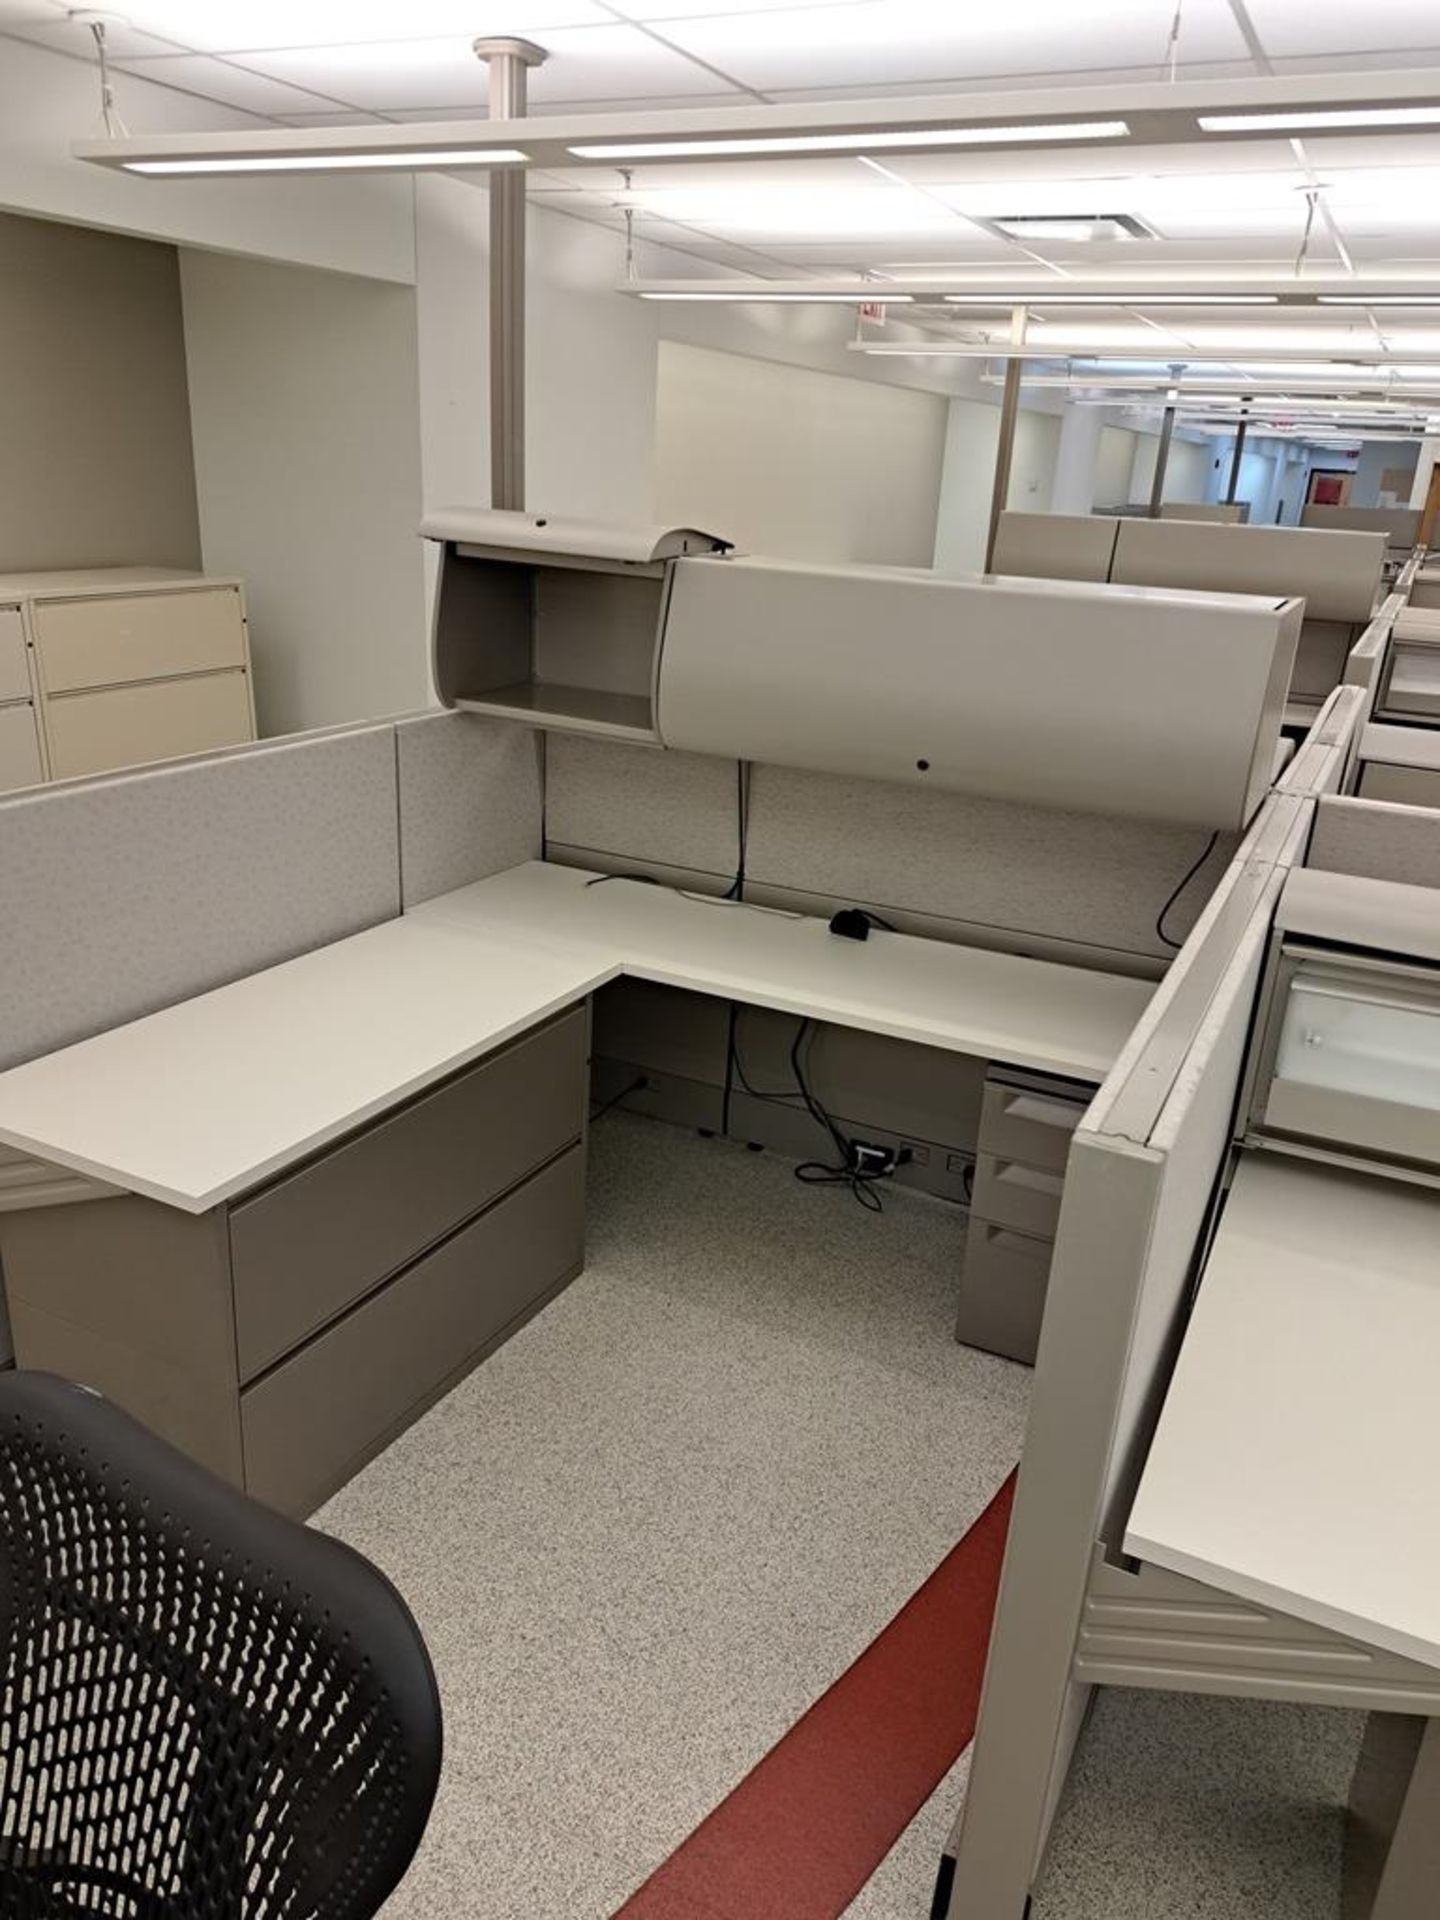 (6) Herman Miller Work Station Cubicles, 20' L X 150" W X 63" T, each cubie has desk, file cabinets, - Image 7 of 7